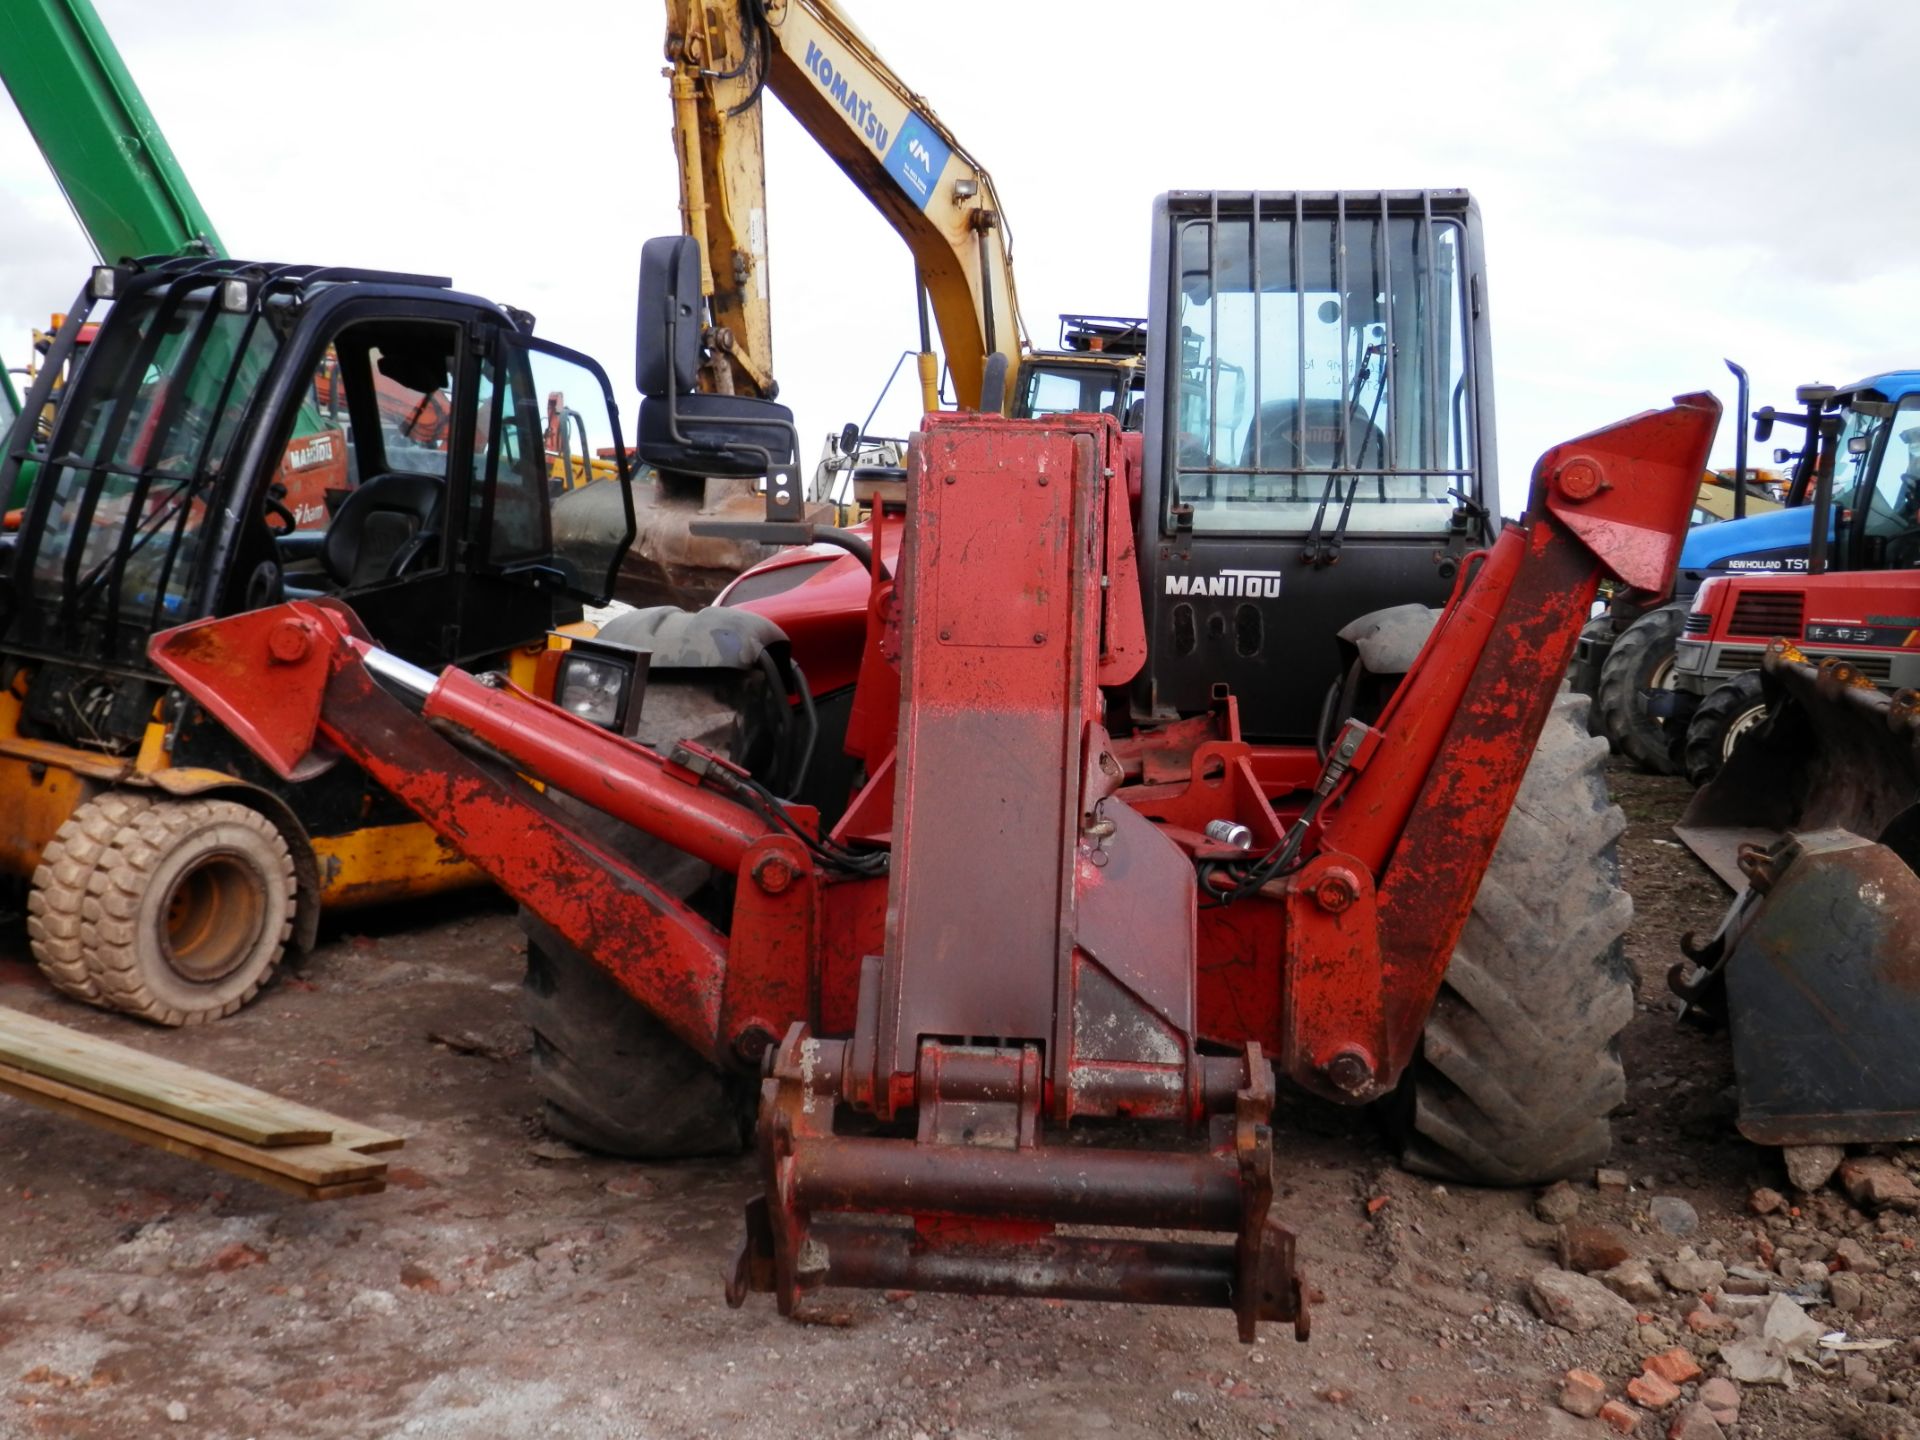 2003 MANITOU MANISCOPIC TELE LIFT WITH FORKS,3.5 TONNE LIFT CAPACITY. - Image 5 of 10